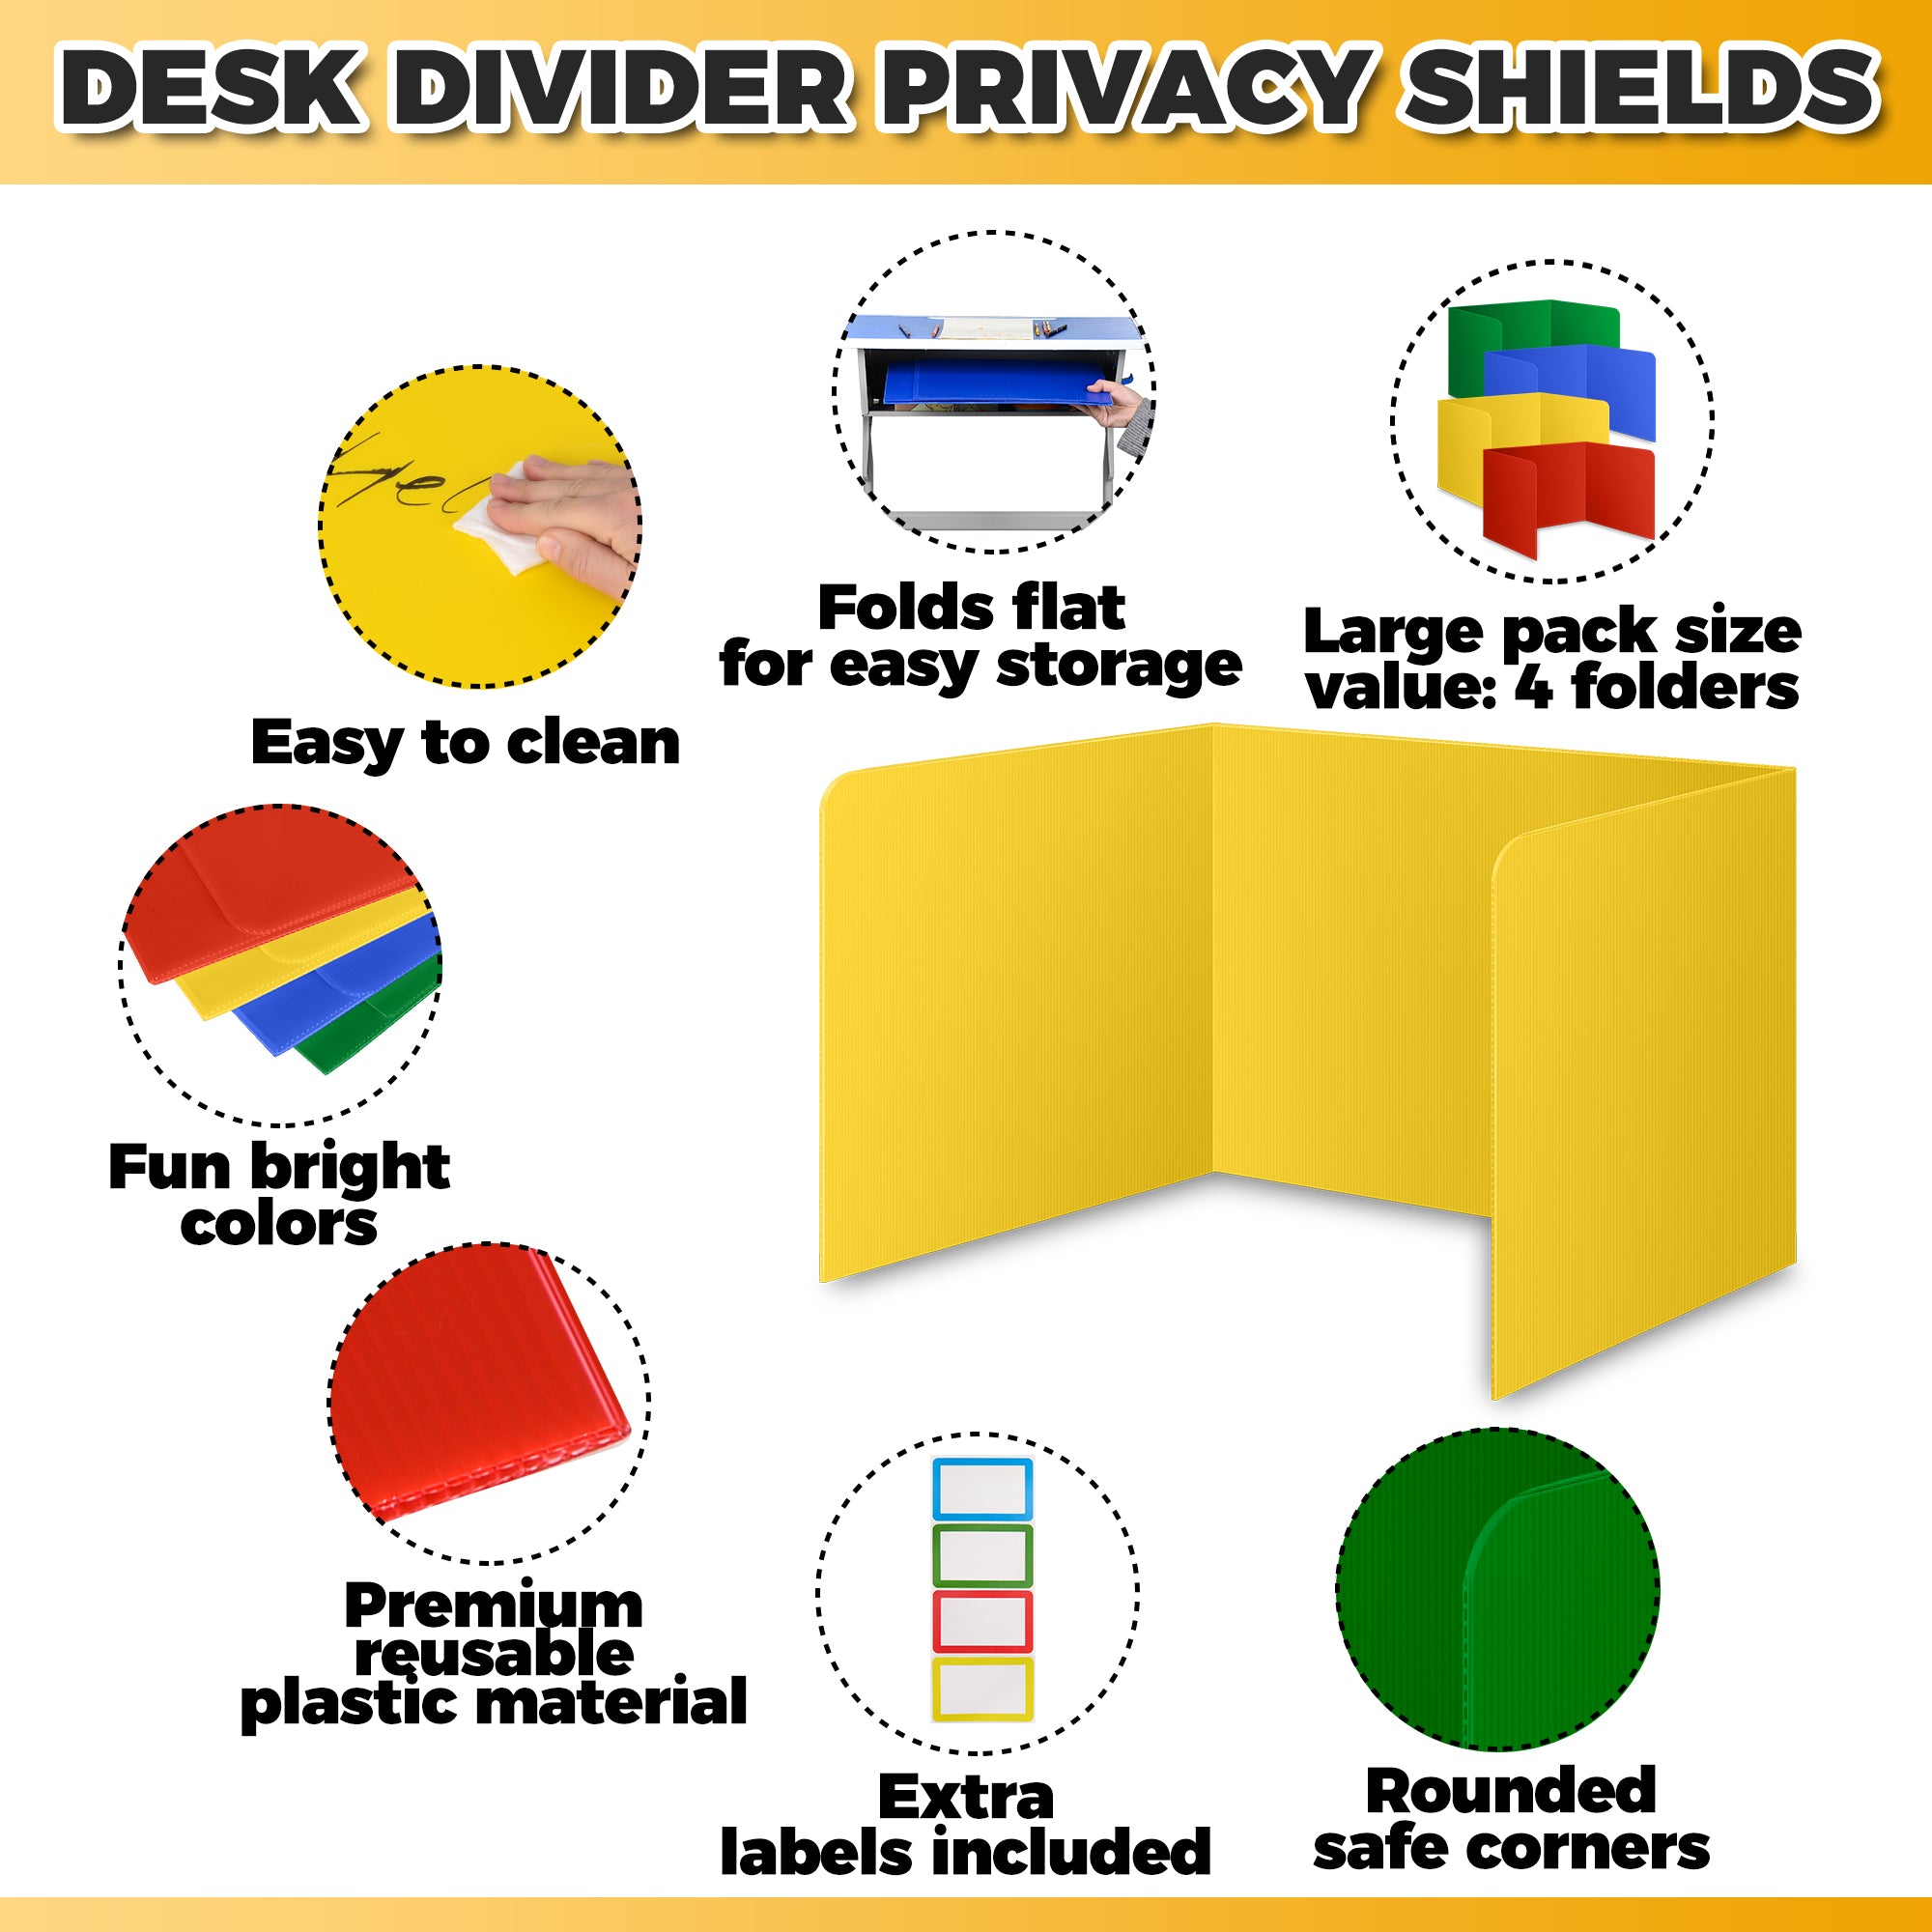 4-Pack Classroom Privacy Shields Desk Dividers for Student Desks - Assorted Colors Easy to Clean Plastic Sneeze Guard Folder Board Study Carrel - Divider Shield Classroom Materials for School Teachers